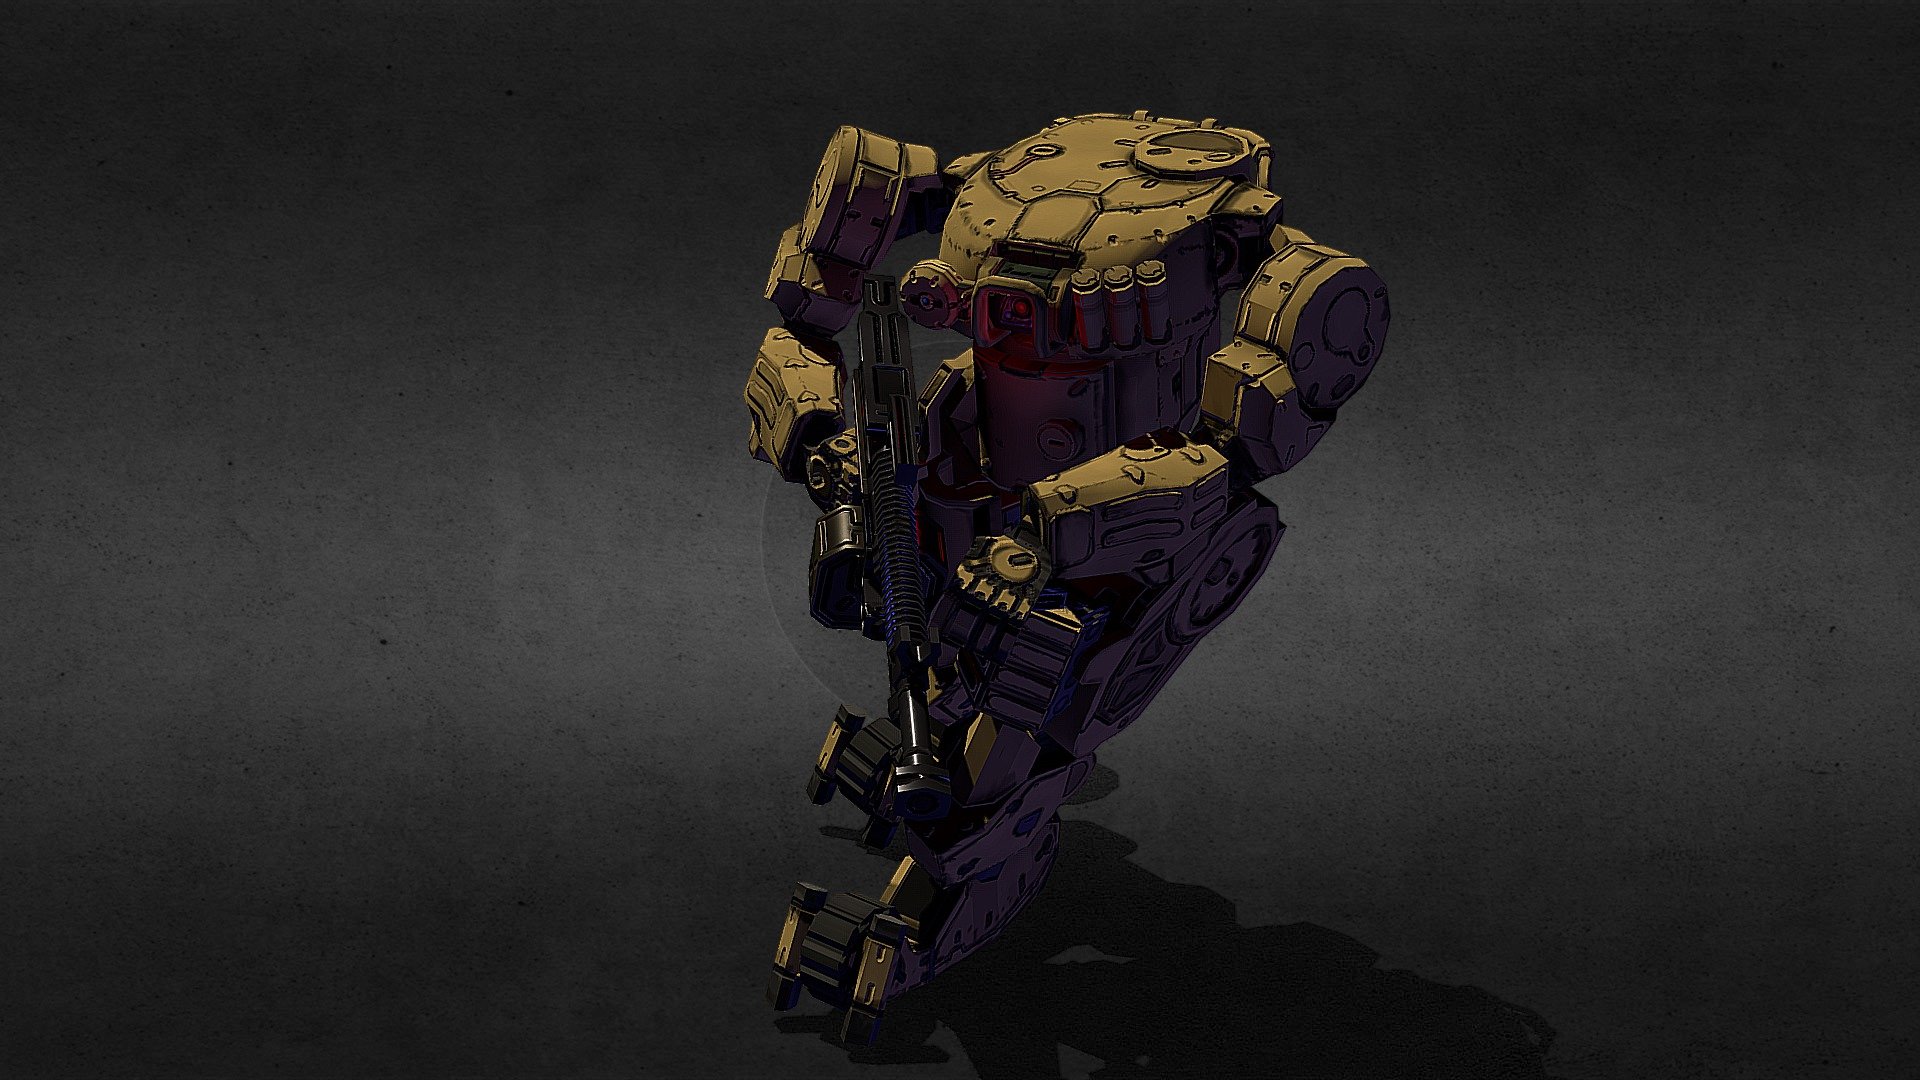 Low poly model of a mech that will be featuring in my game demo/prototype 3d model